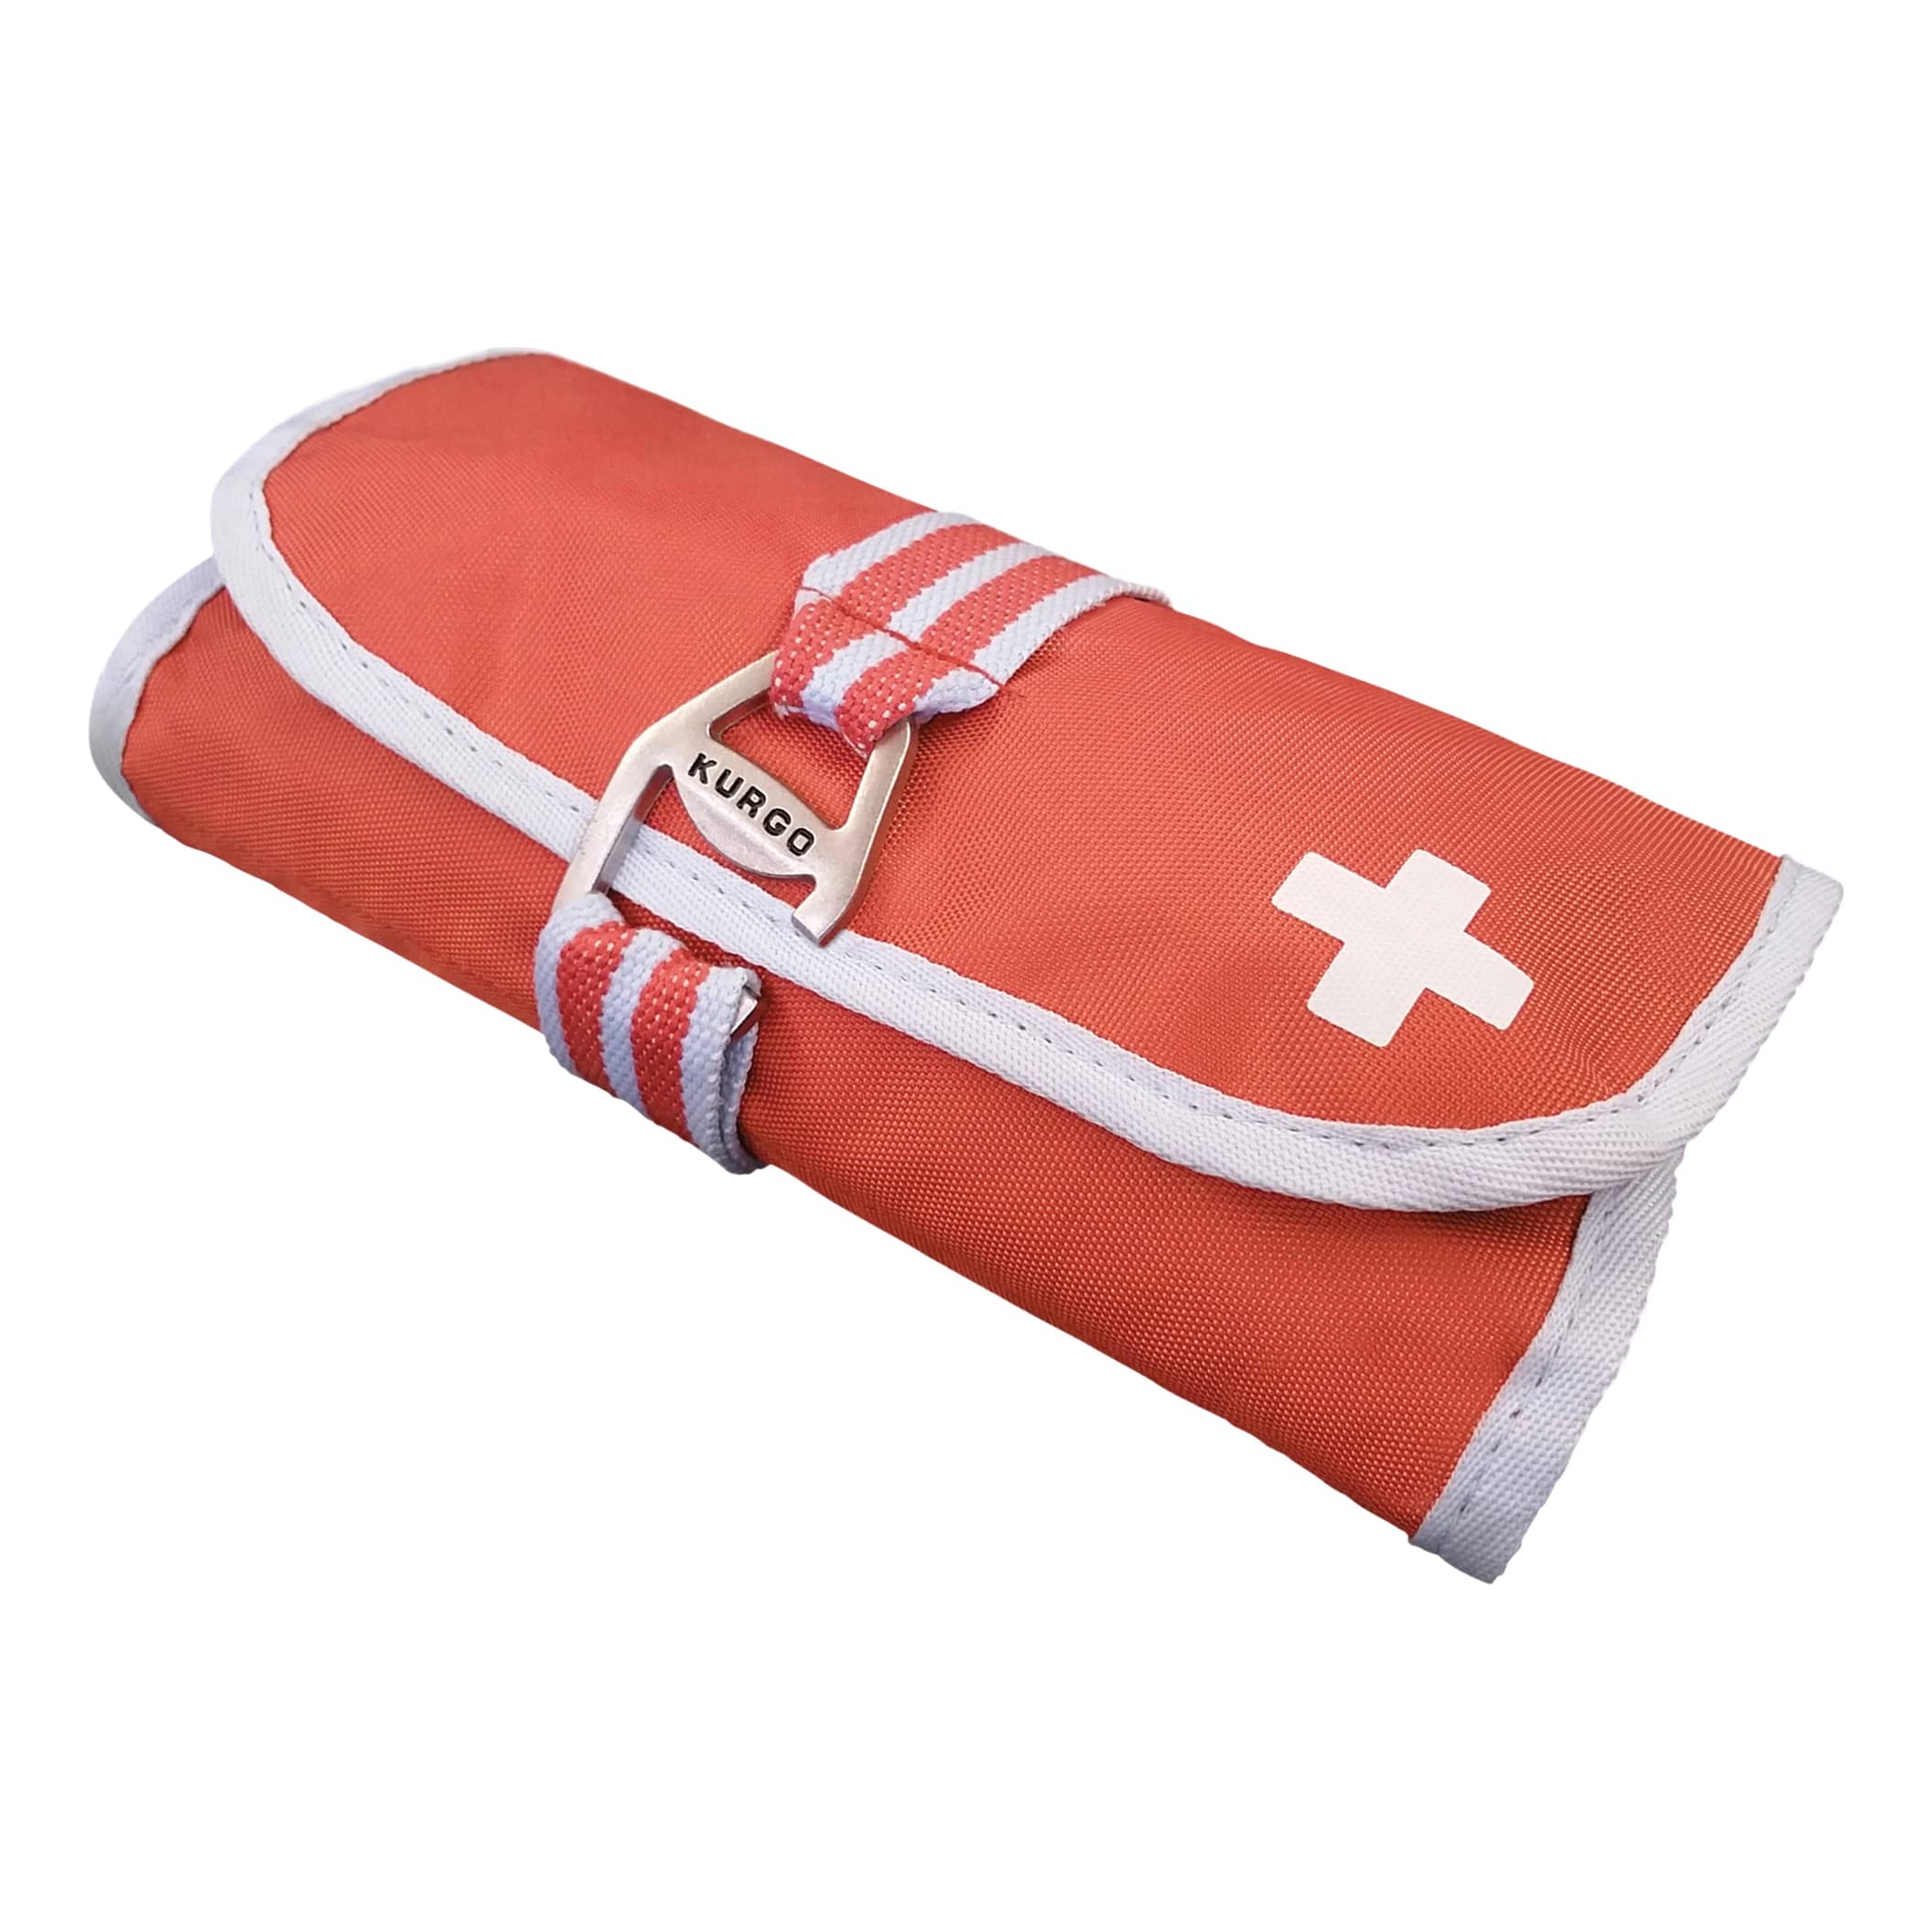 Kurgo® First Aid Kit for Dogs